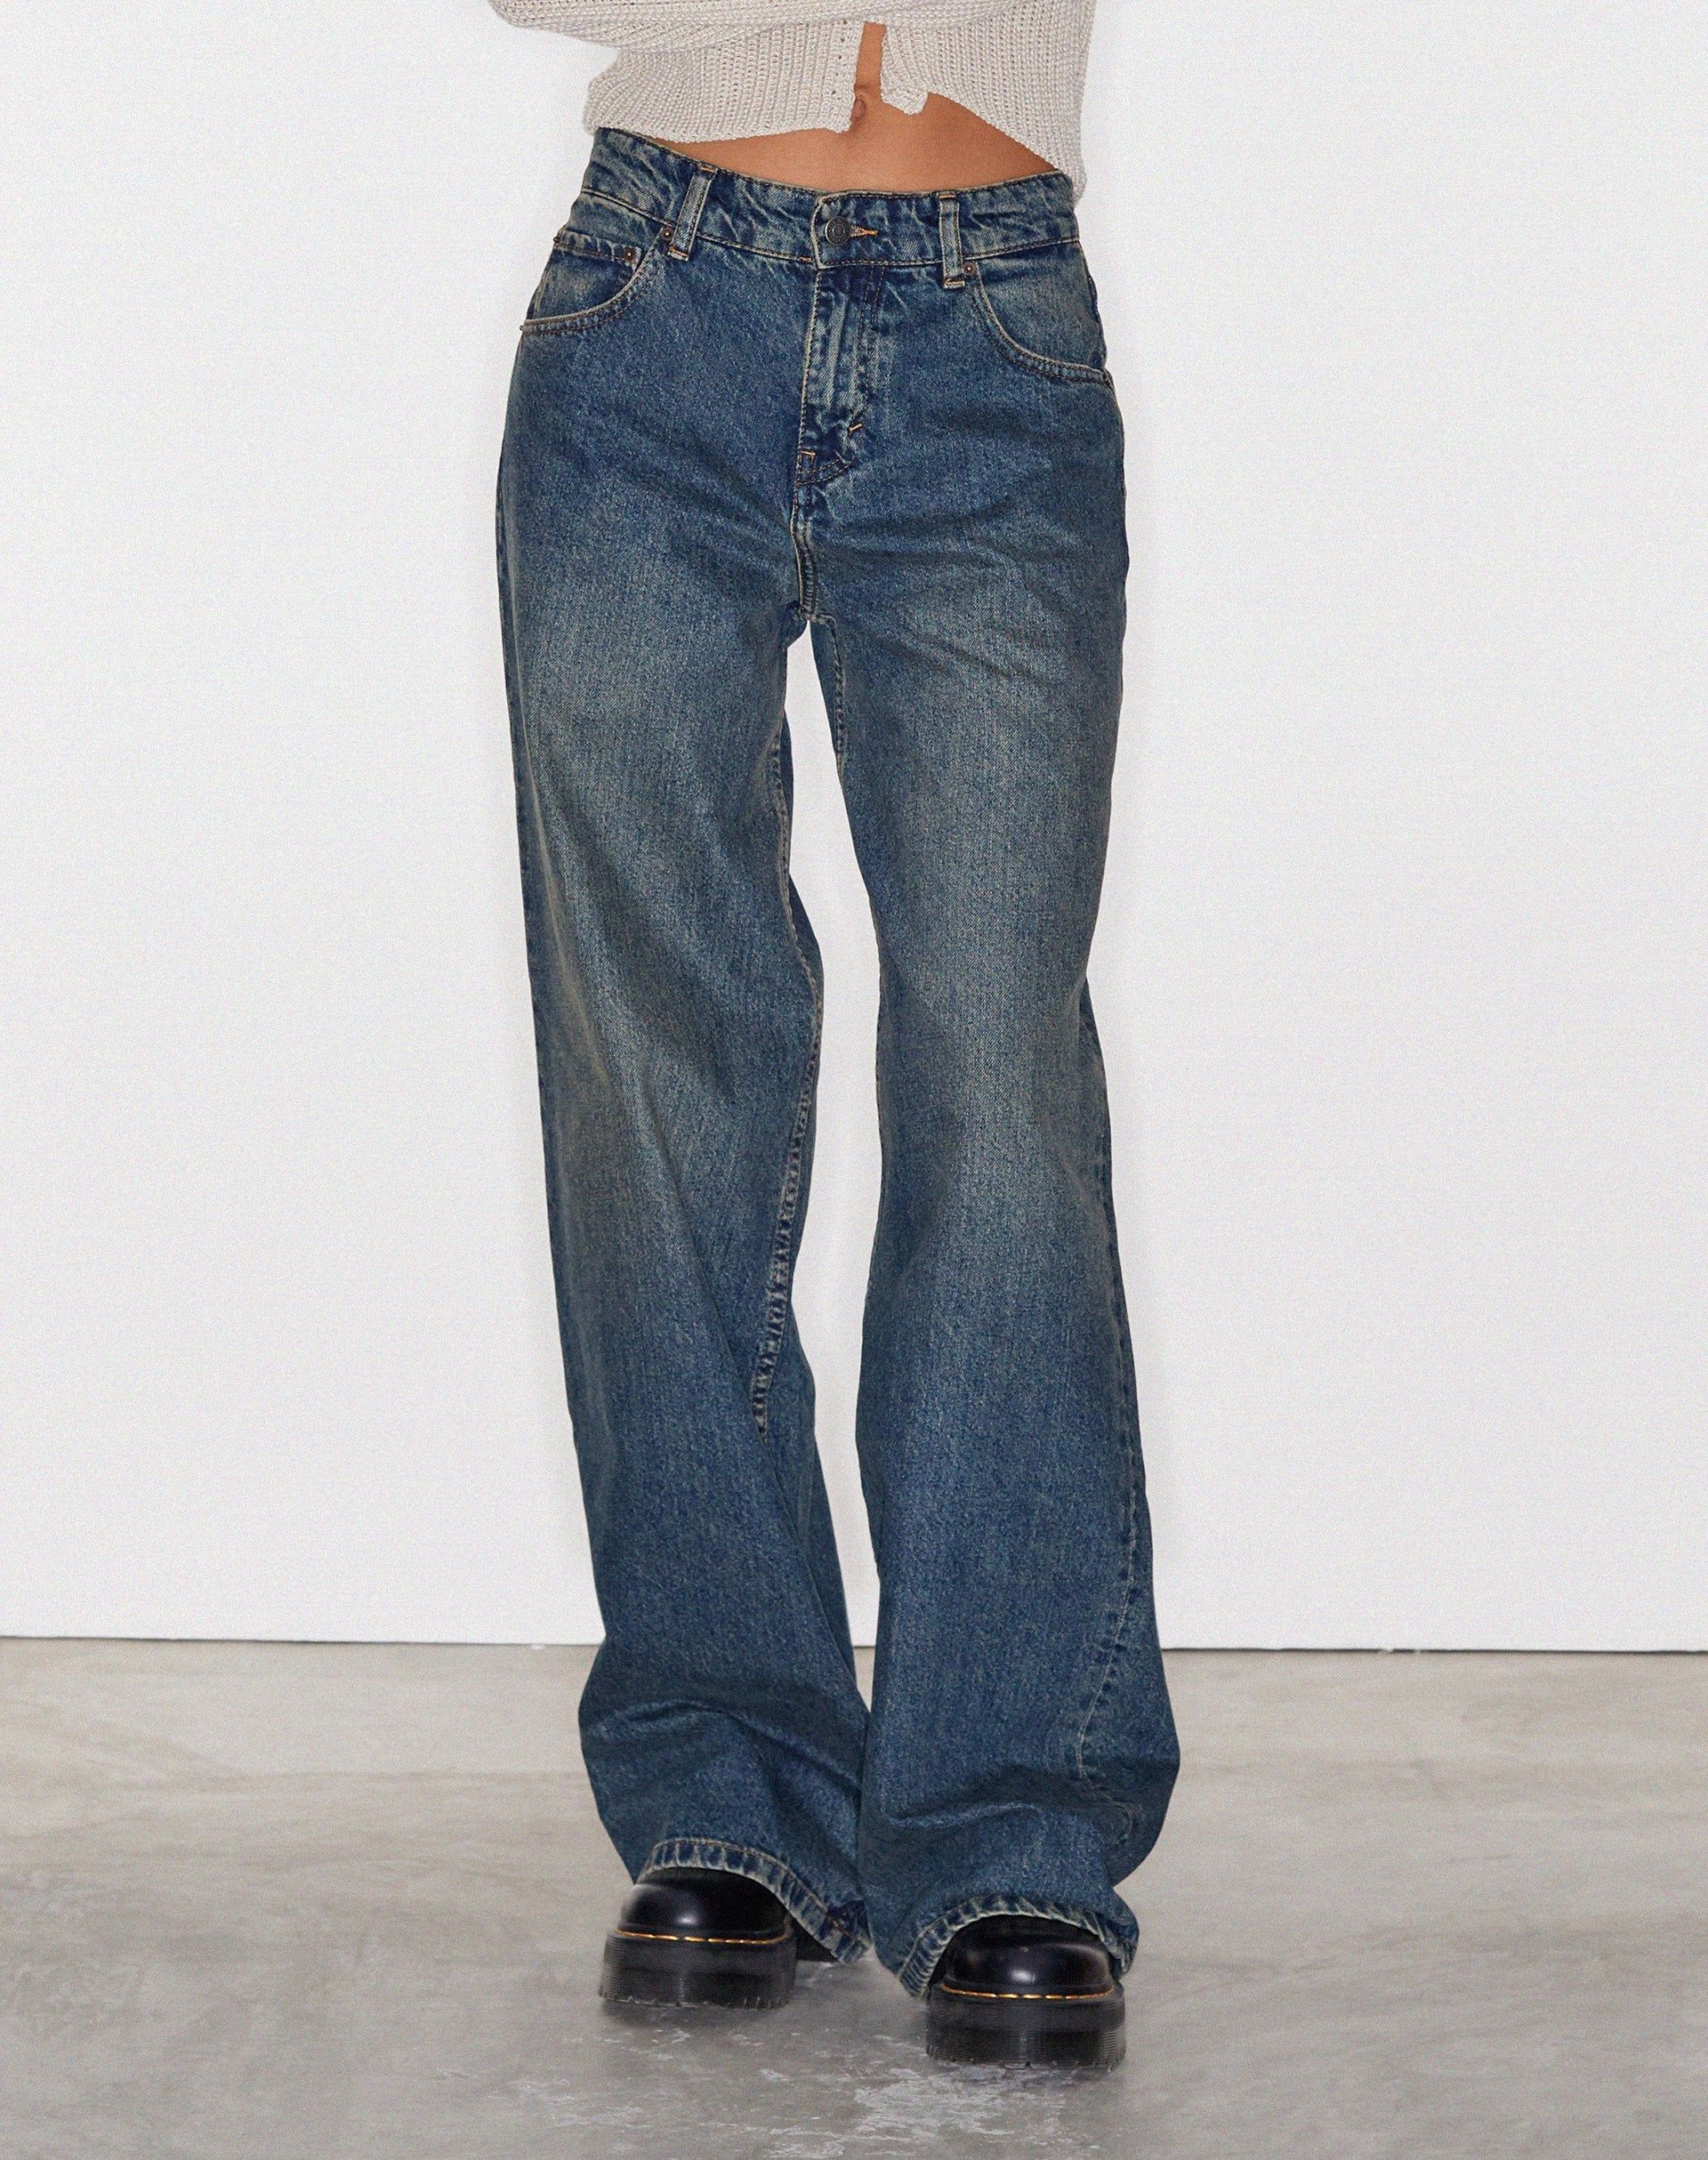 Classic Comfort: Elevate Your Look with Blue Jeans